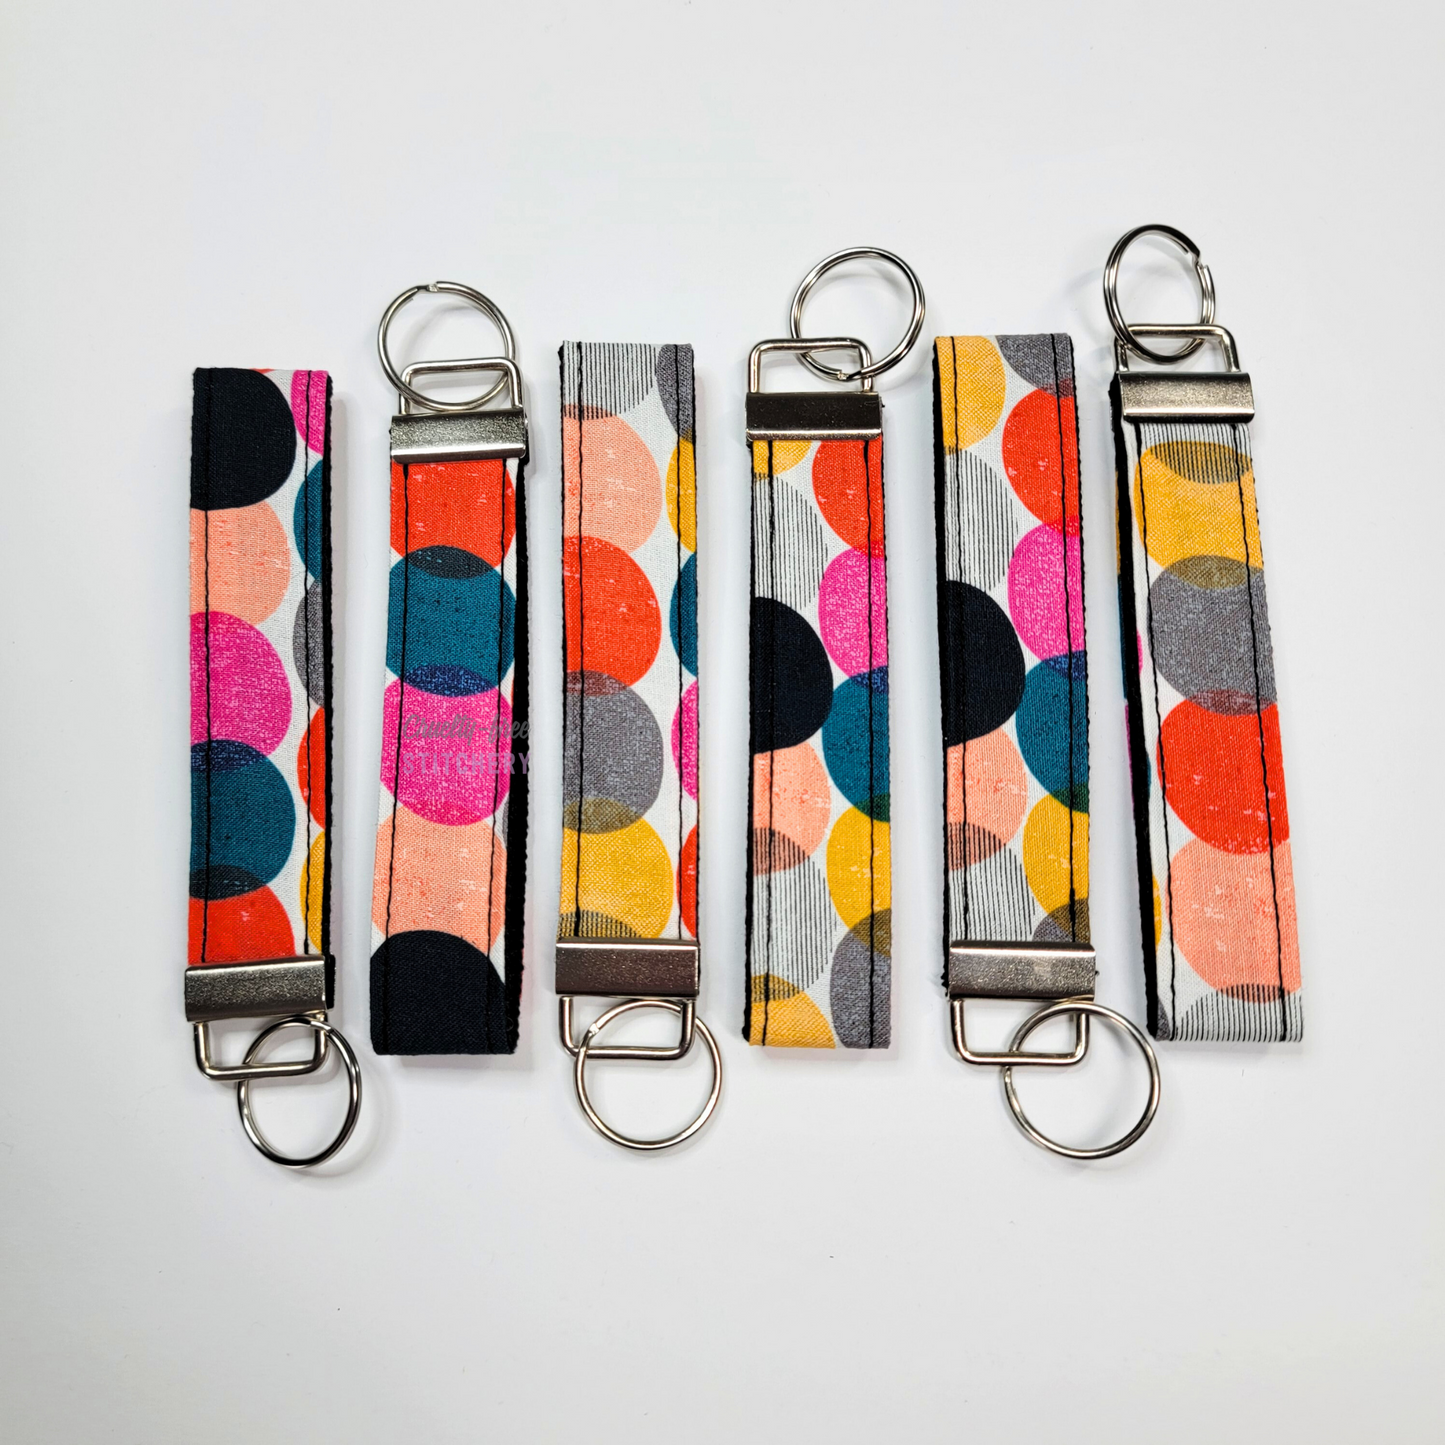 Wristlets arranged in a row to show each may be slightly different due to placement of the fabric.